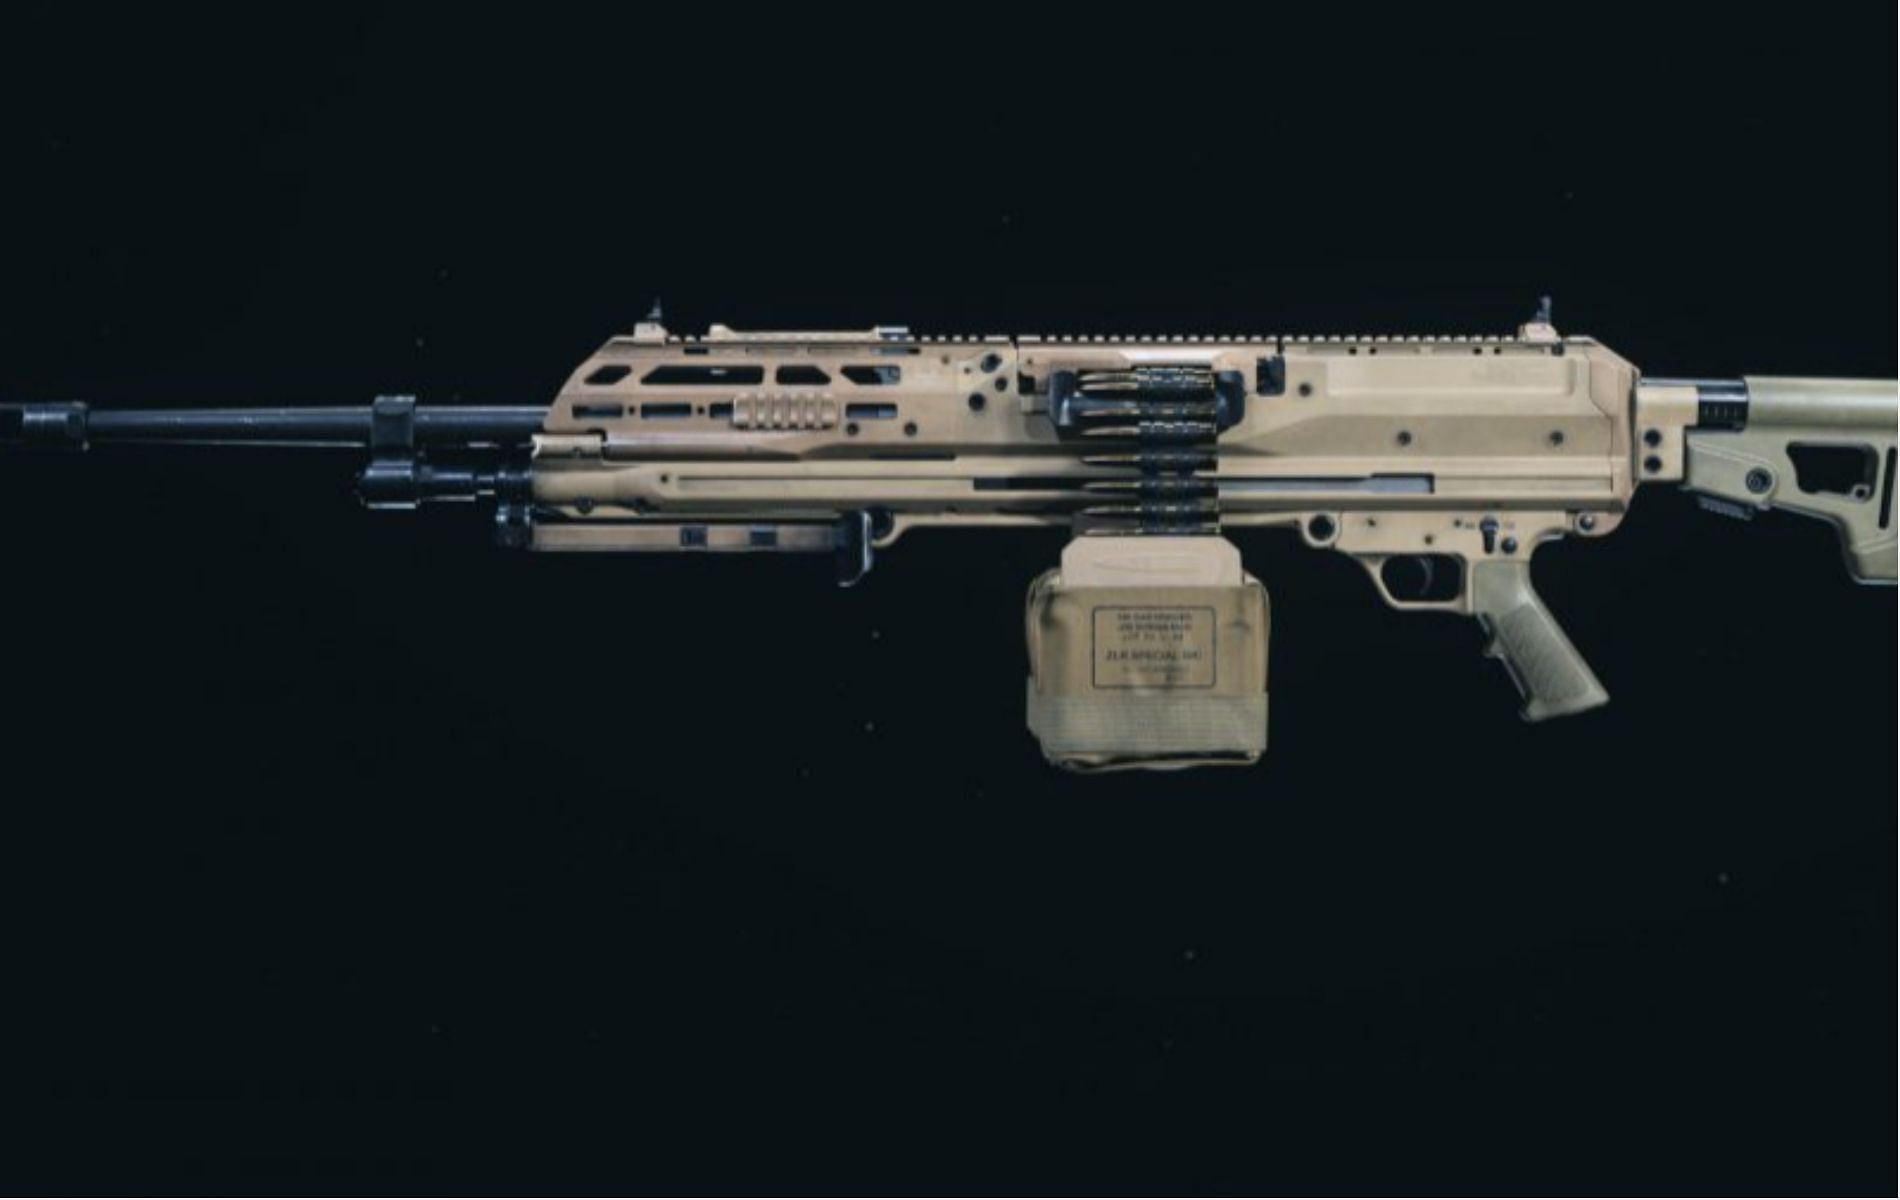 The RAAL LMG in Call of Duty Warzone (Image via Activision)